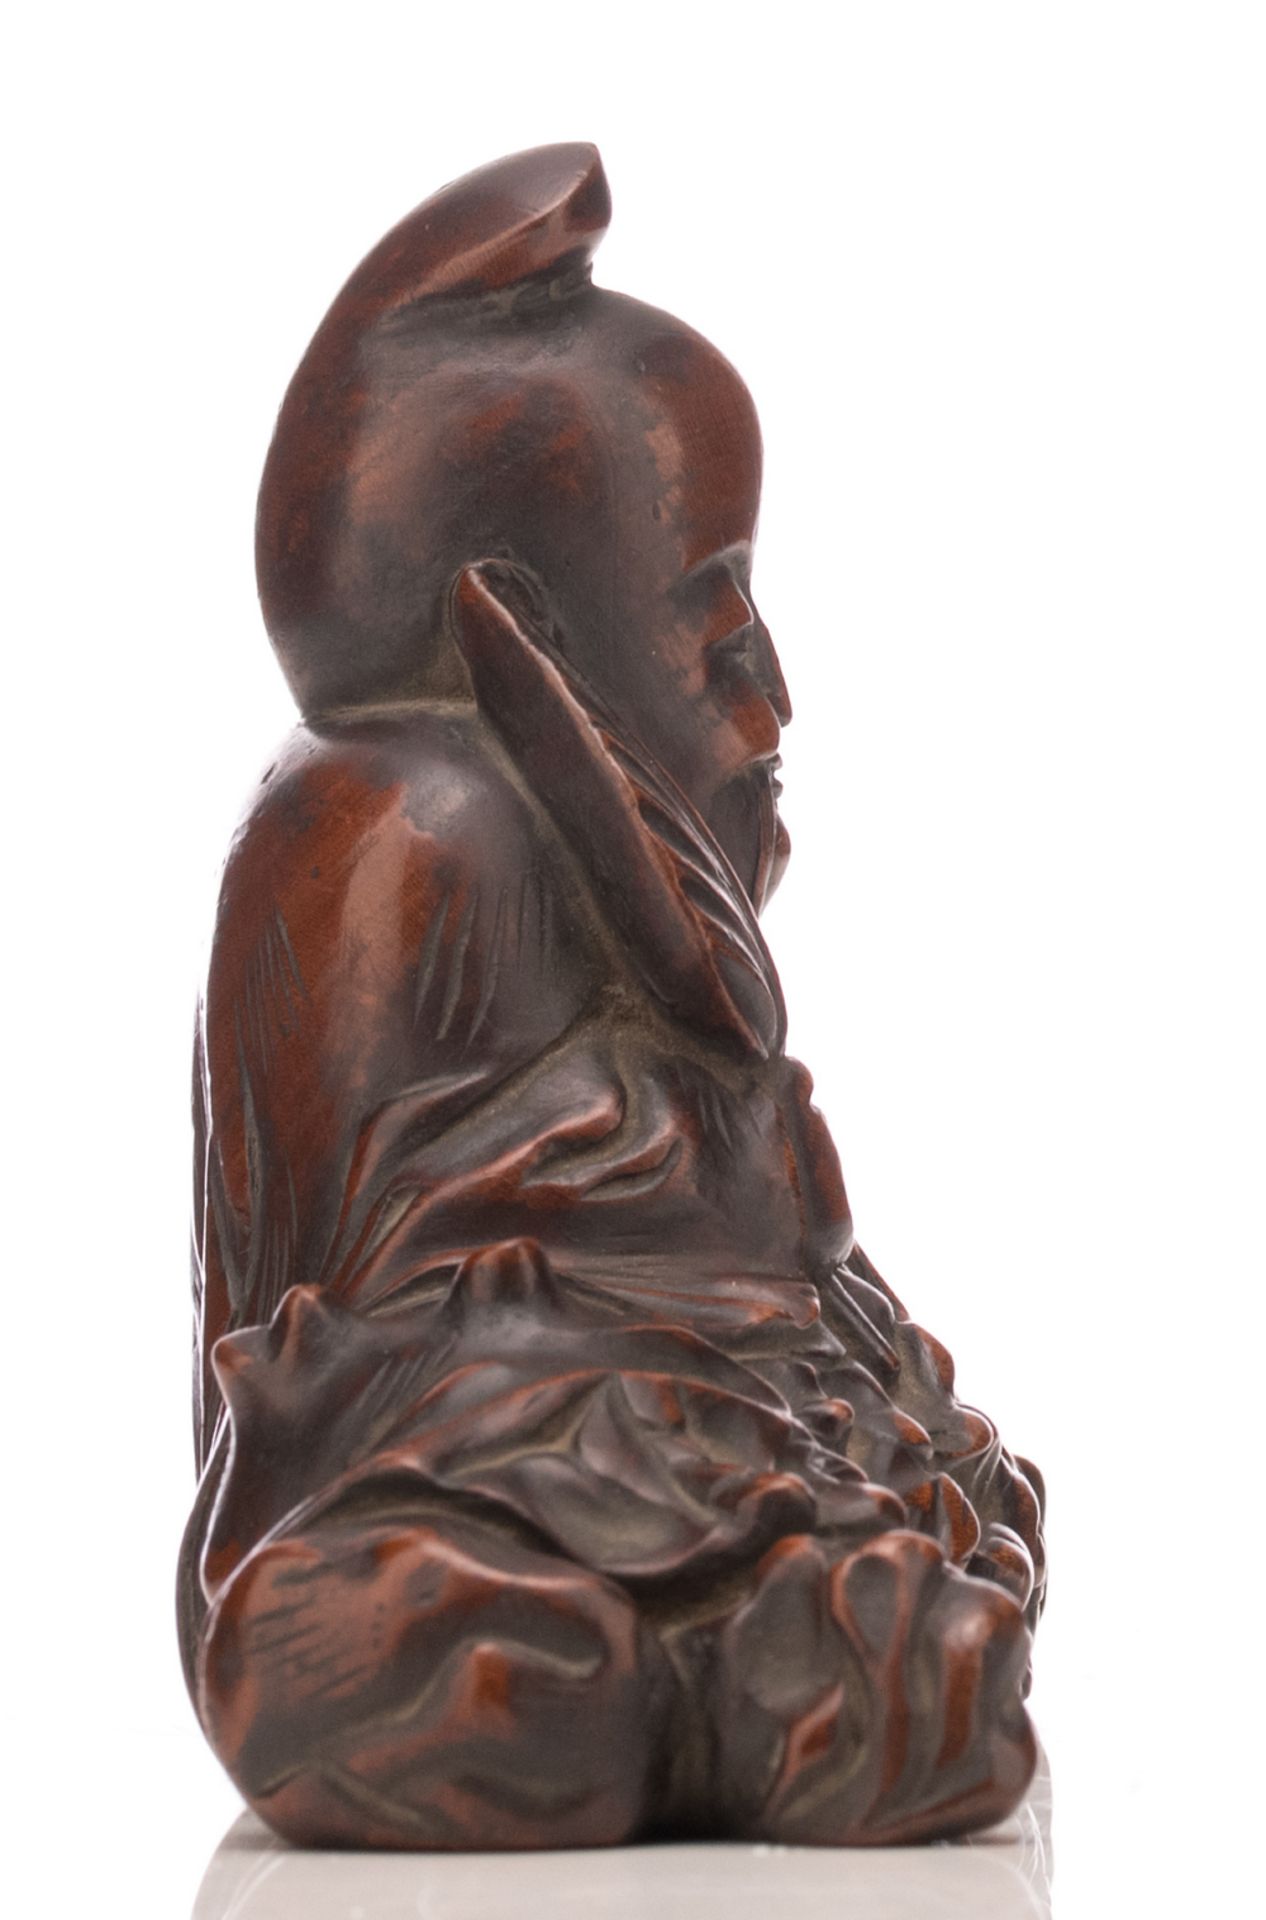 A fine Chinese carved wooden figure, depicting a lying deity, H 11 - W 17 cm - Image 4 of 6